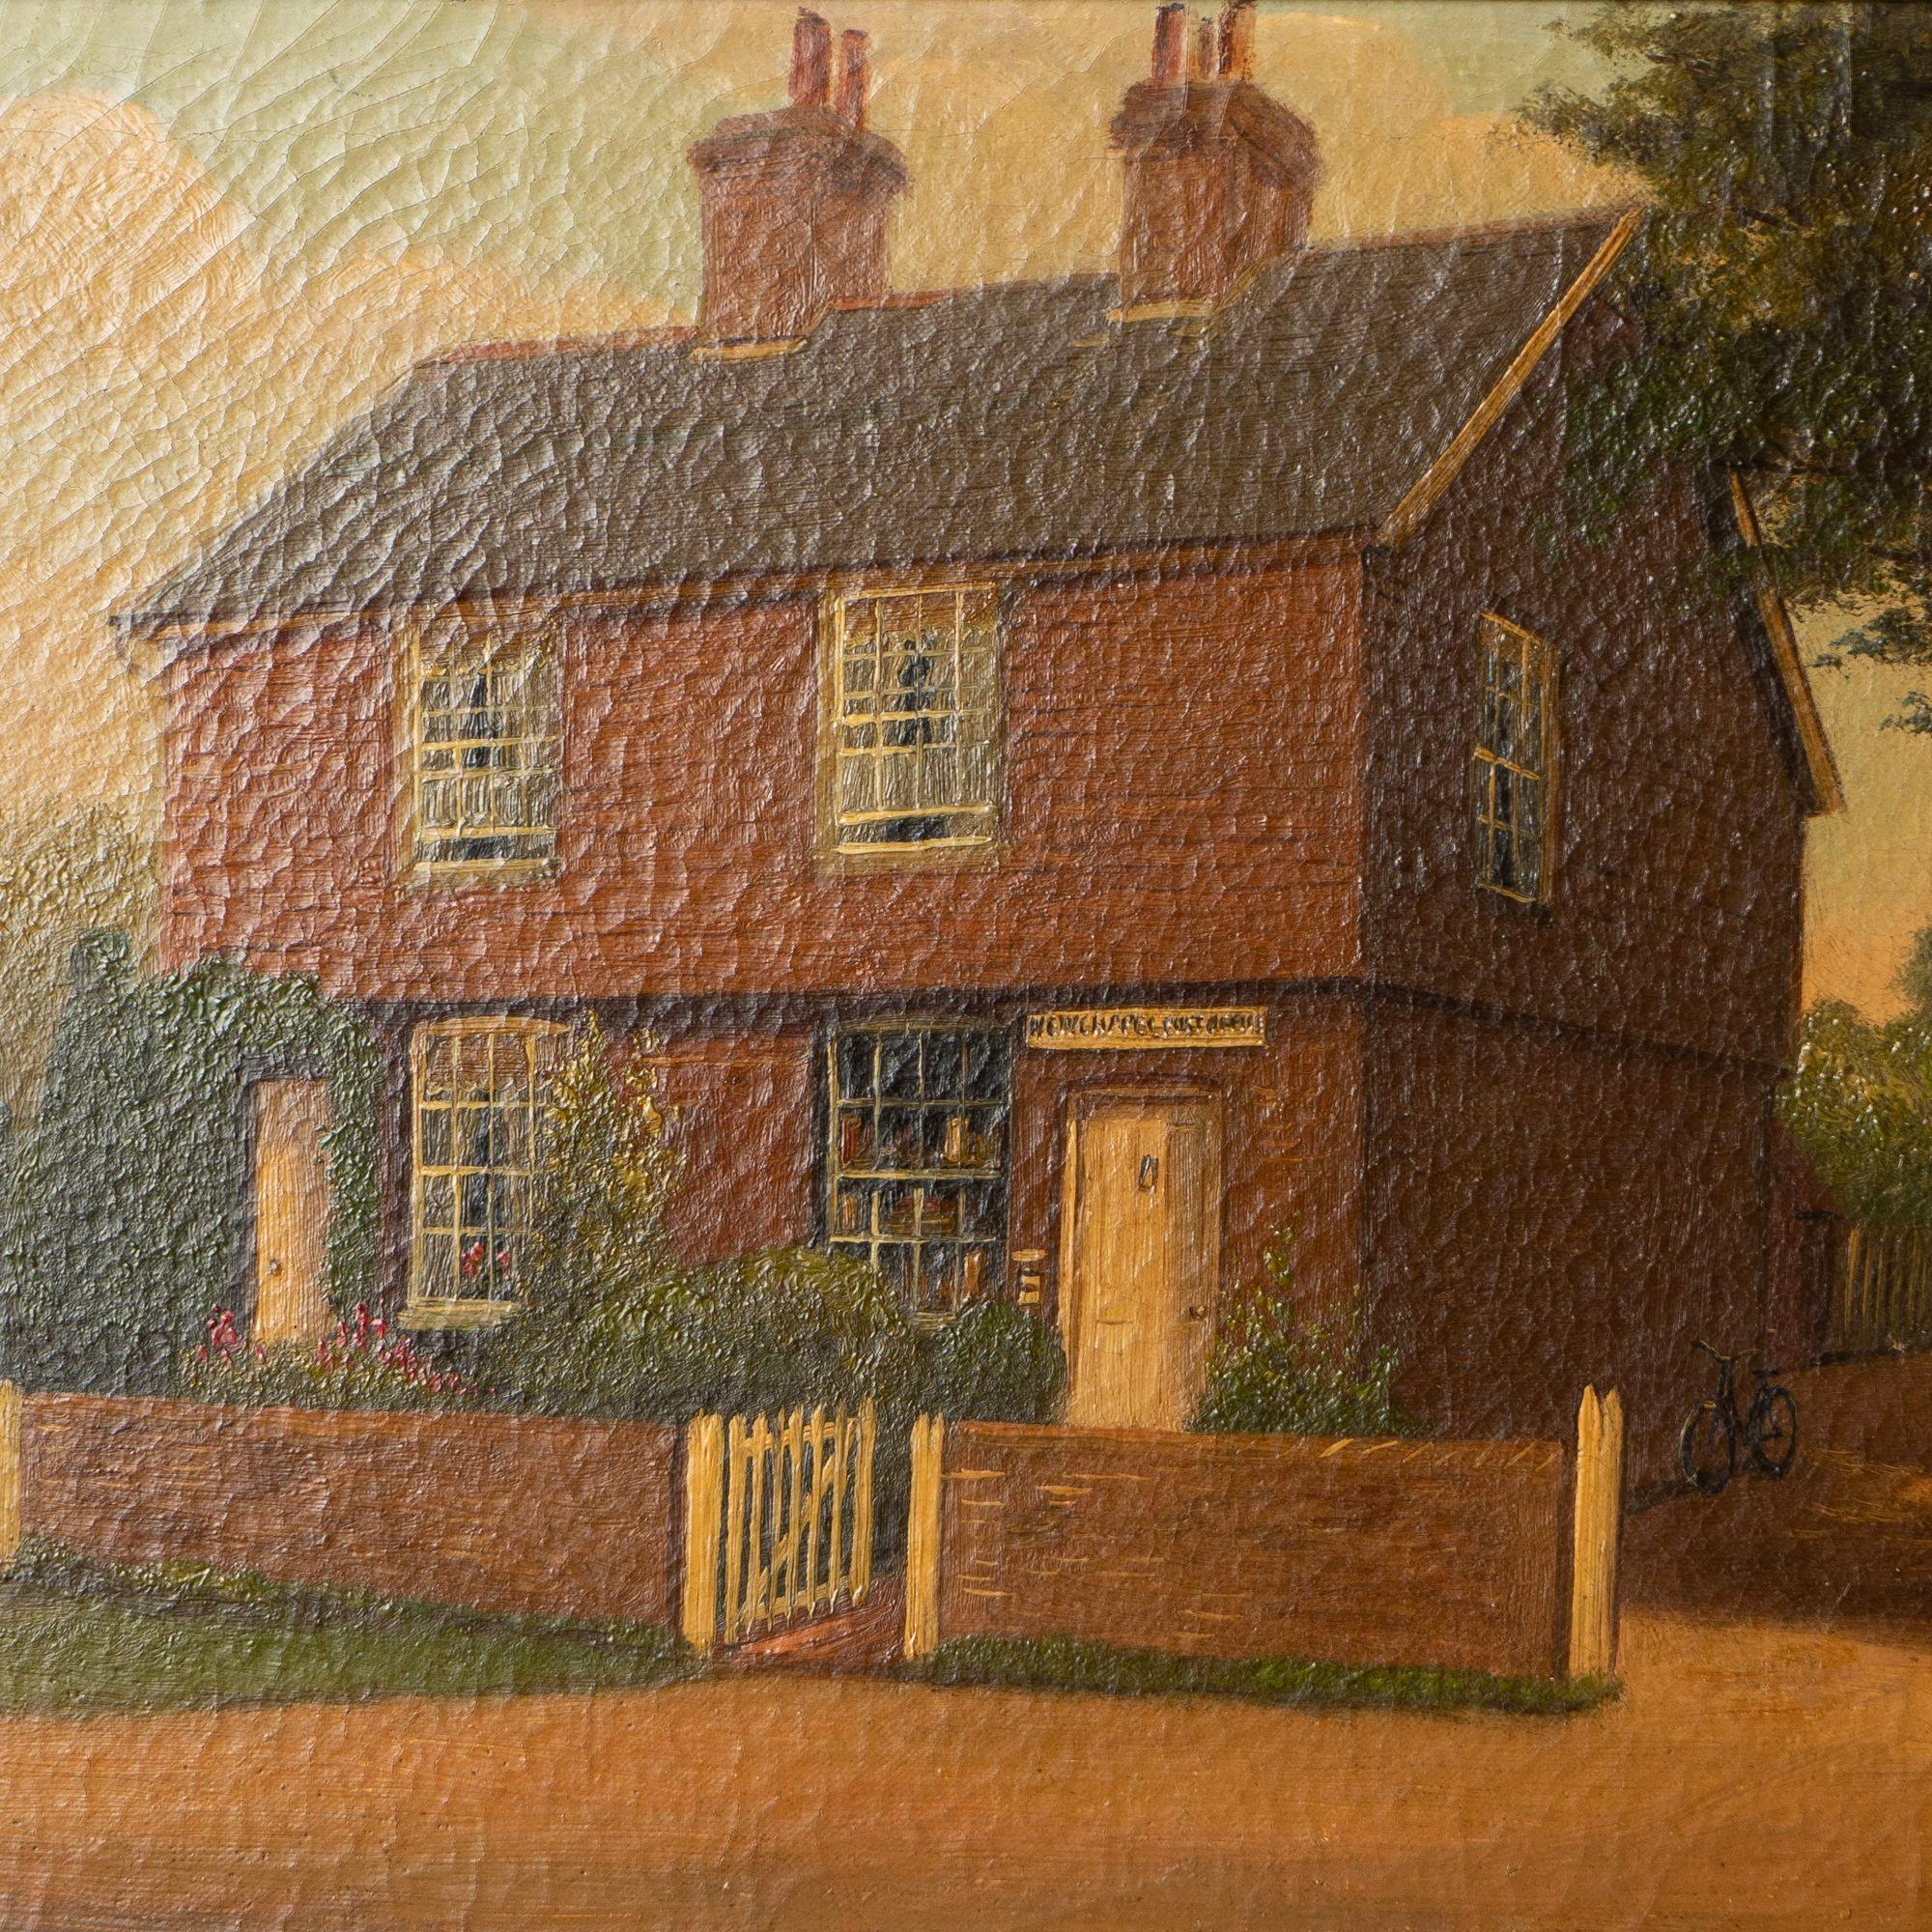 ANTIQUE EDWARDIAN ORIGINAL OIL ON CANVAS FOLK ART PAINTING
BY FRANCIS VINGOE (1879-1940)
Vingoe used to travel around door to door, mainly in Berkshire and Oxfordshire showing examples of his work and asking people if they would like him to paint